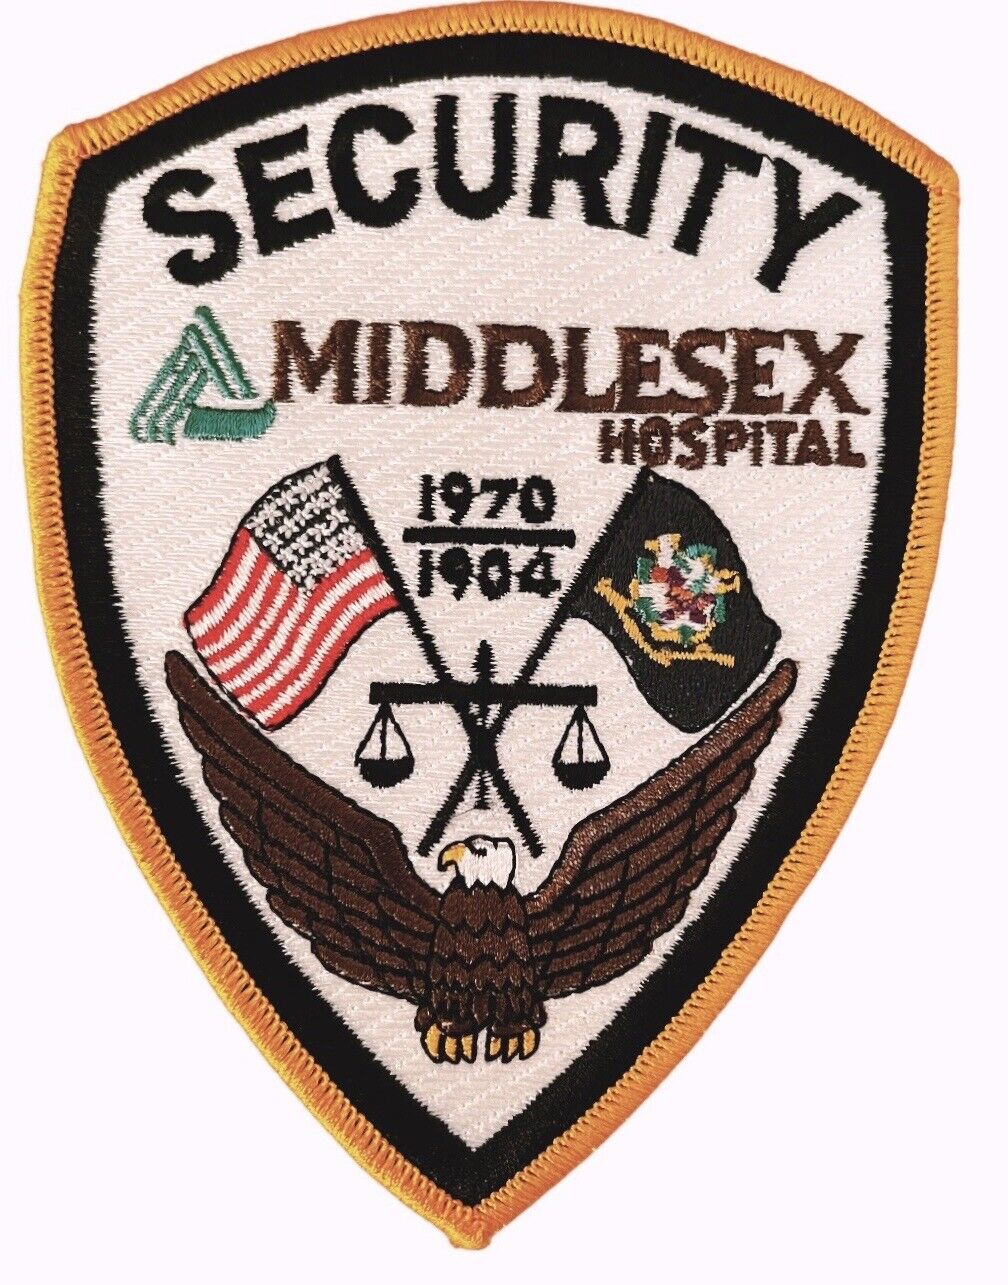 MIDDLESEX HOSPITAL SECURITY Middletown Connecticut CT Embroidered Patch FLAGS 5”